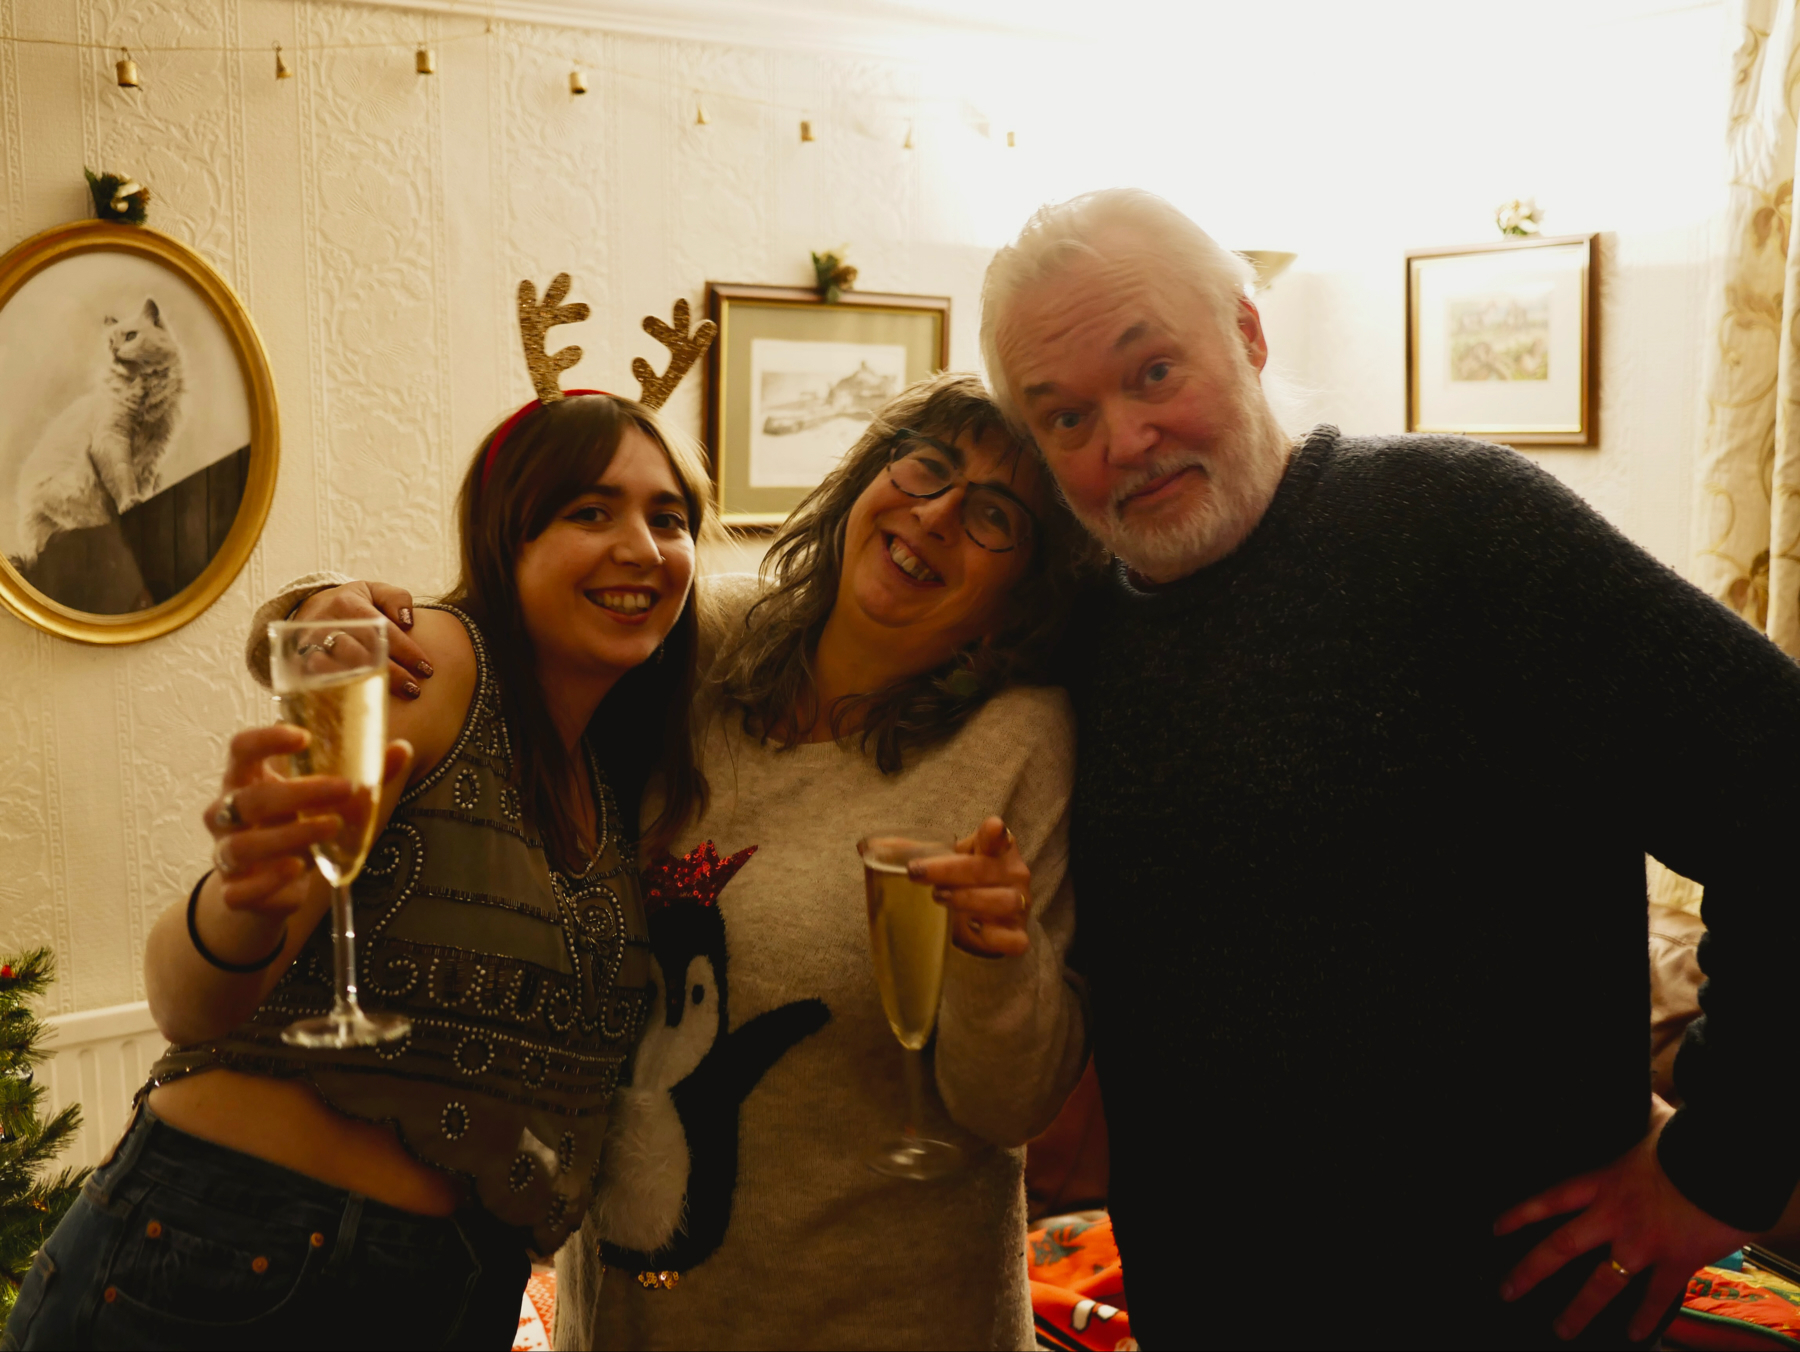 Three people smiling and posing for a photo indoors, likely during a festive gathering. The woman on the left is holding a glass of champagne, the woman in the middle is wearing glasses and wearing a holiday-themed jumper with a penguin.